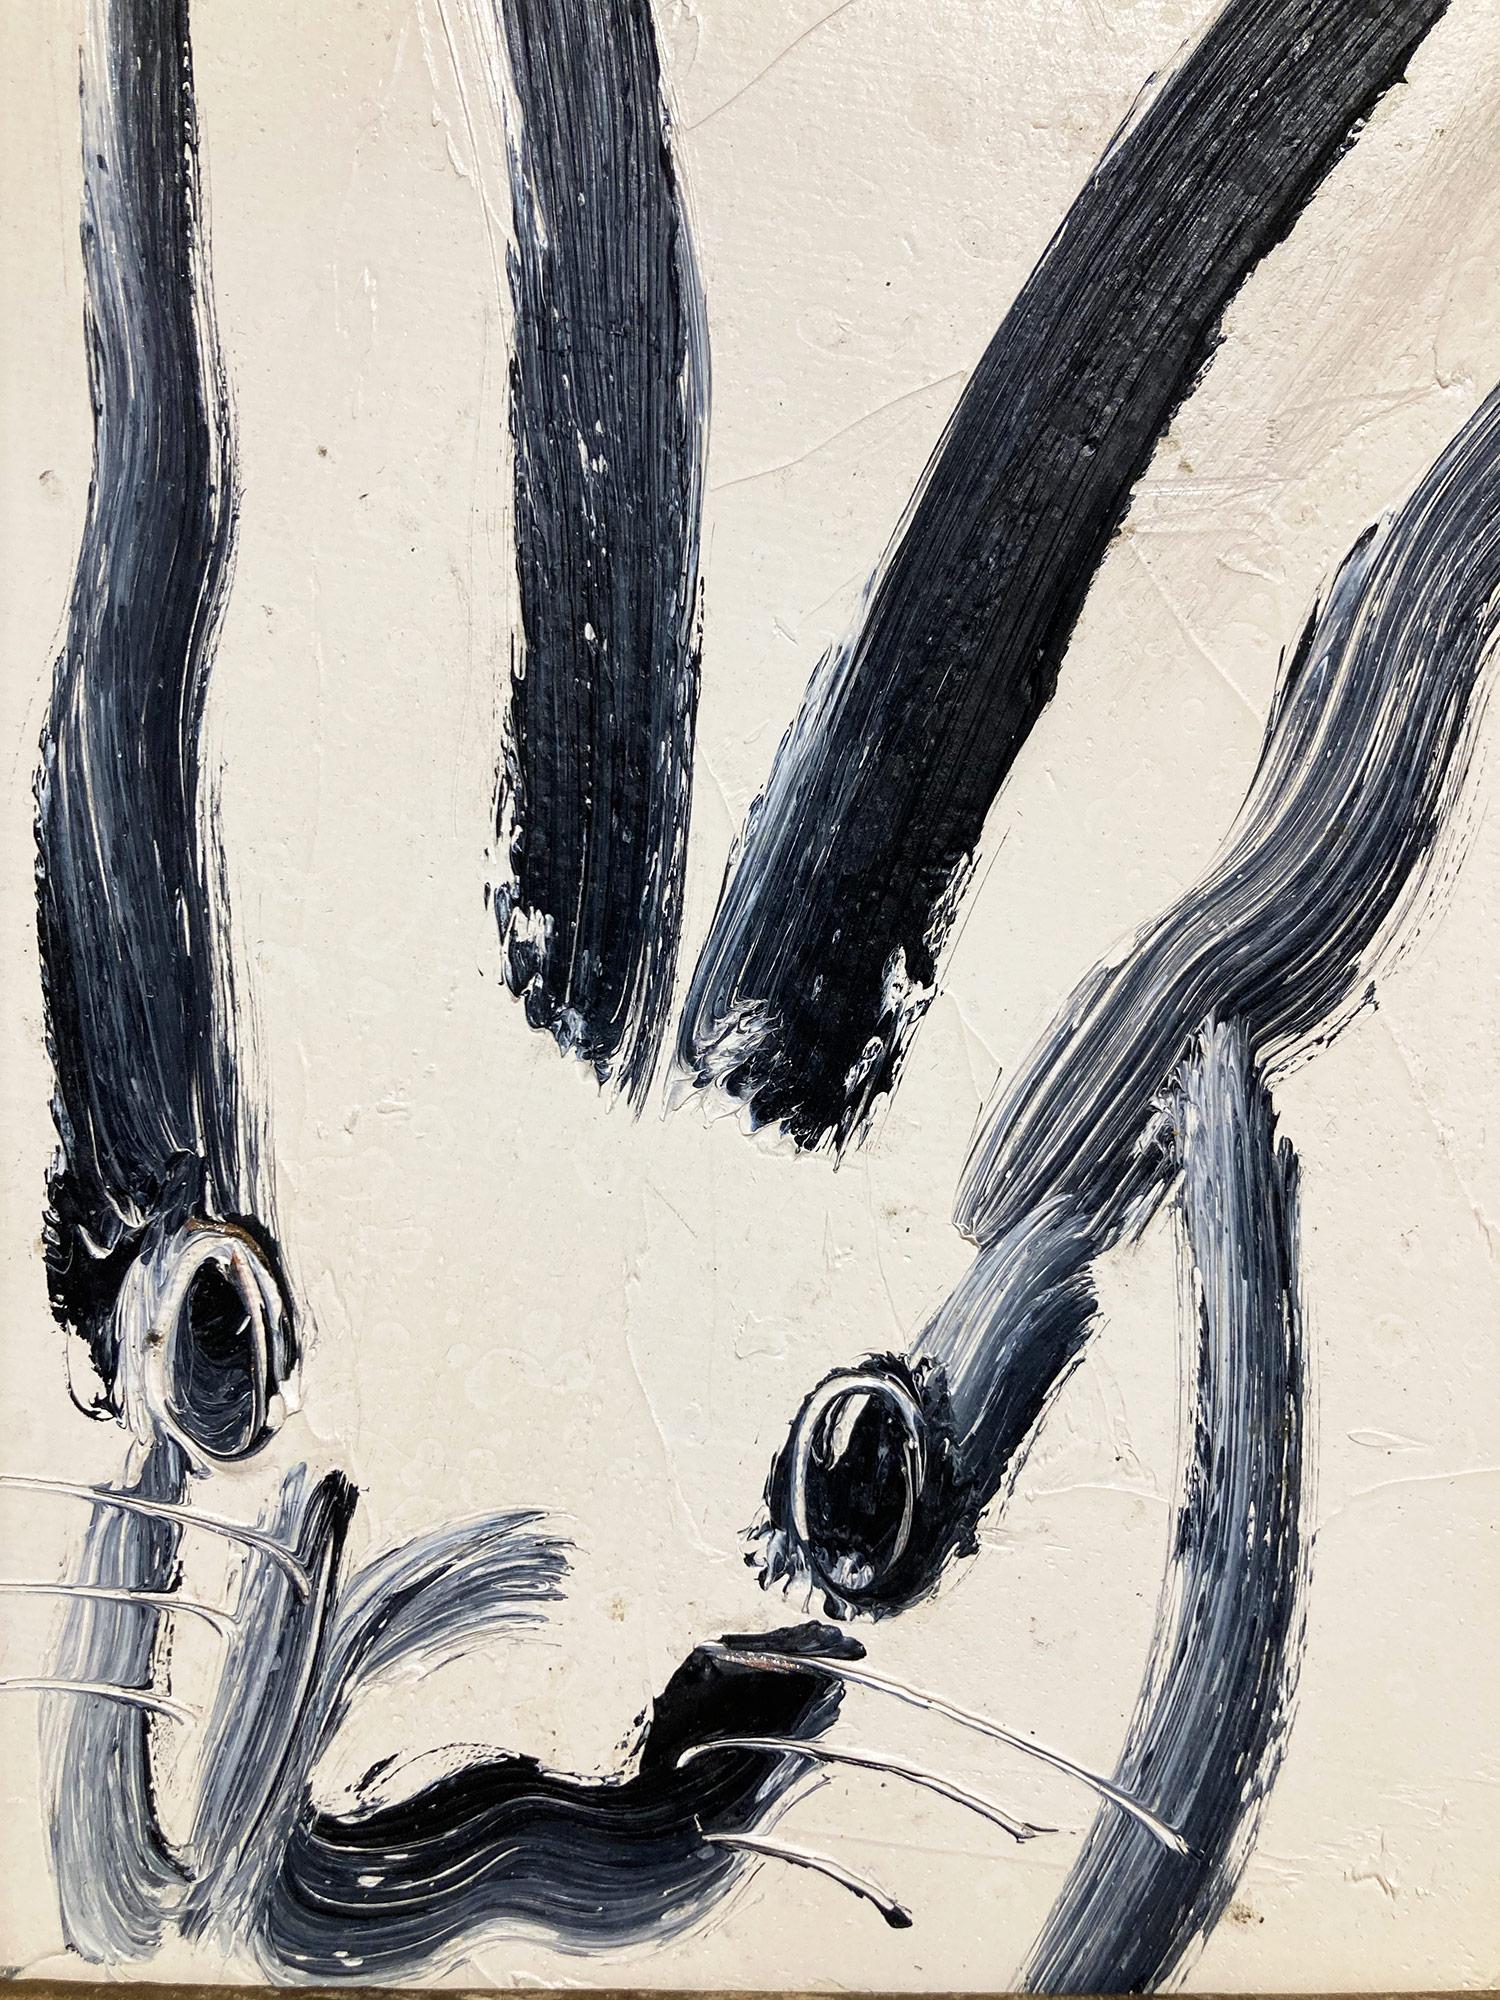 A wonderful composition of one of Slonem's most iconic subjects, Bunnies. This piece depicts a gestural figure of a black bunny on white background with thick use of paint. It is housed in a wonderful frame. Inspired by nature and a genuine love for